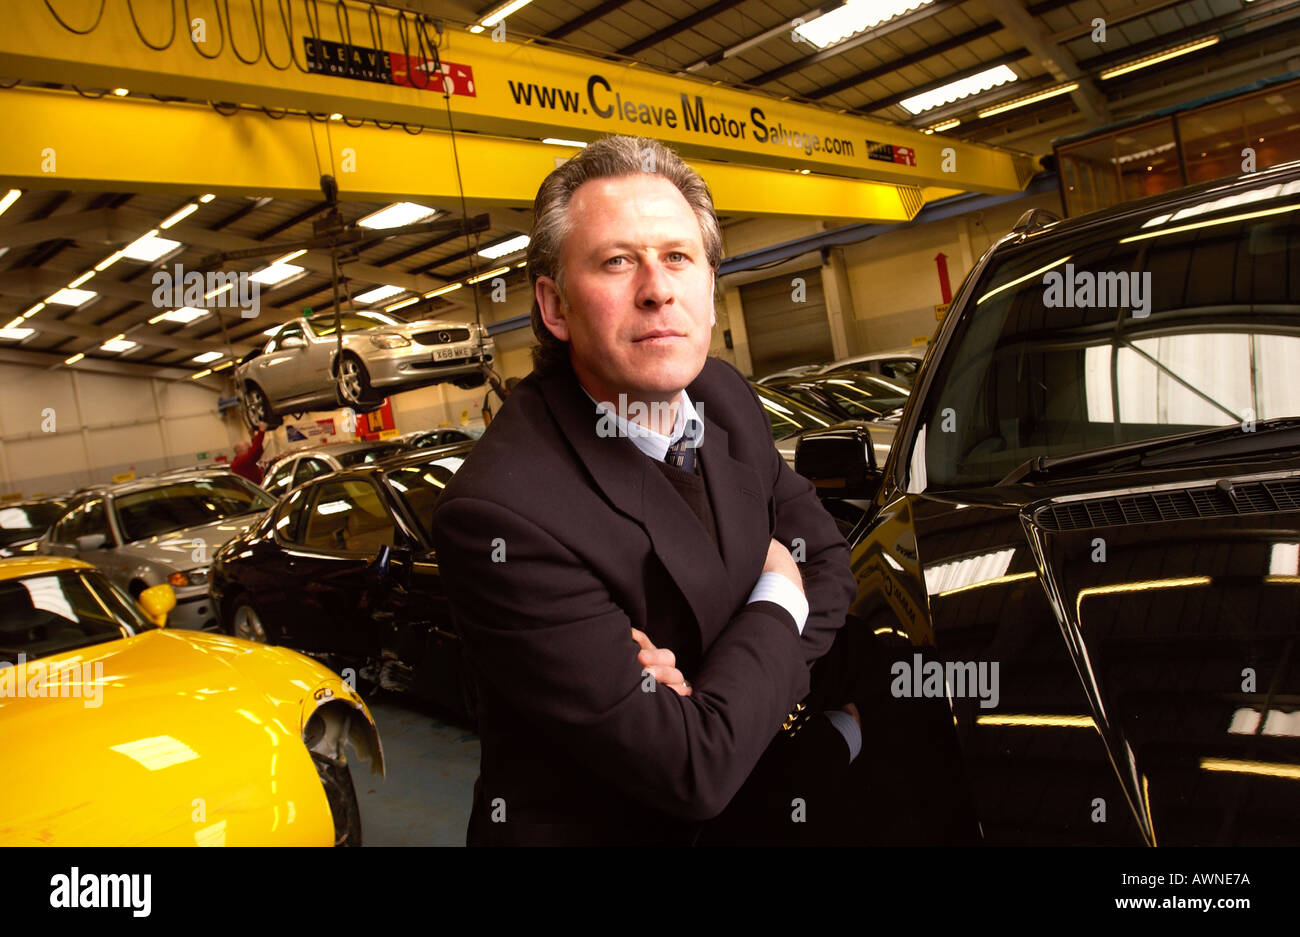 JULIAN CLEAVE OF CLEAVE MOTOR SALVAGE IN GLOUCESTER UK Stock Photo